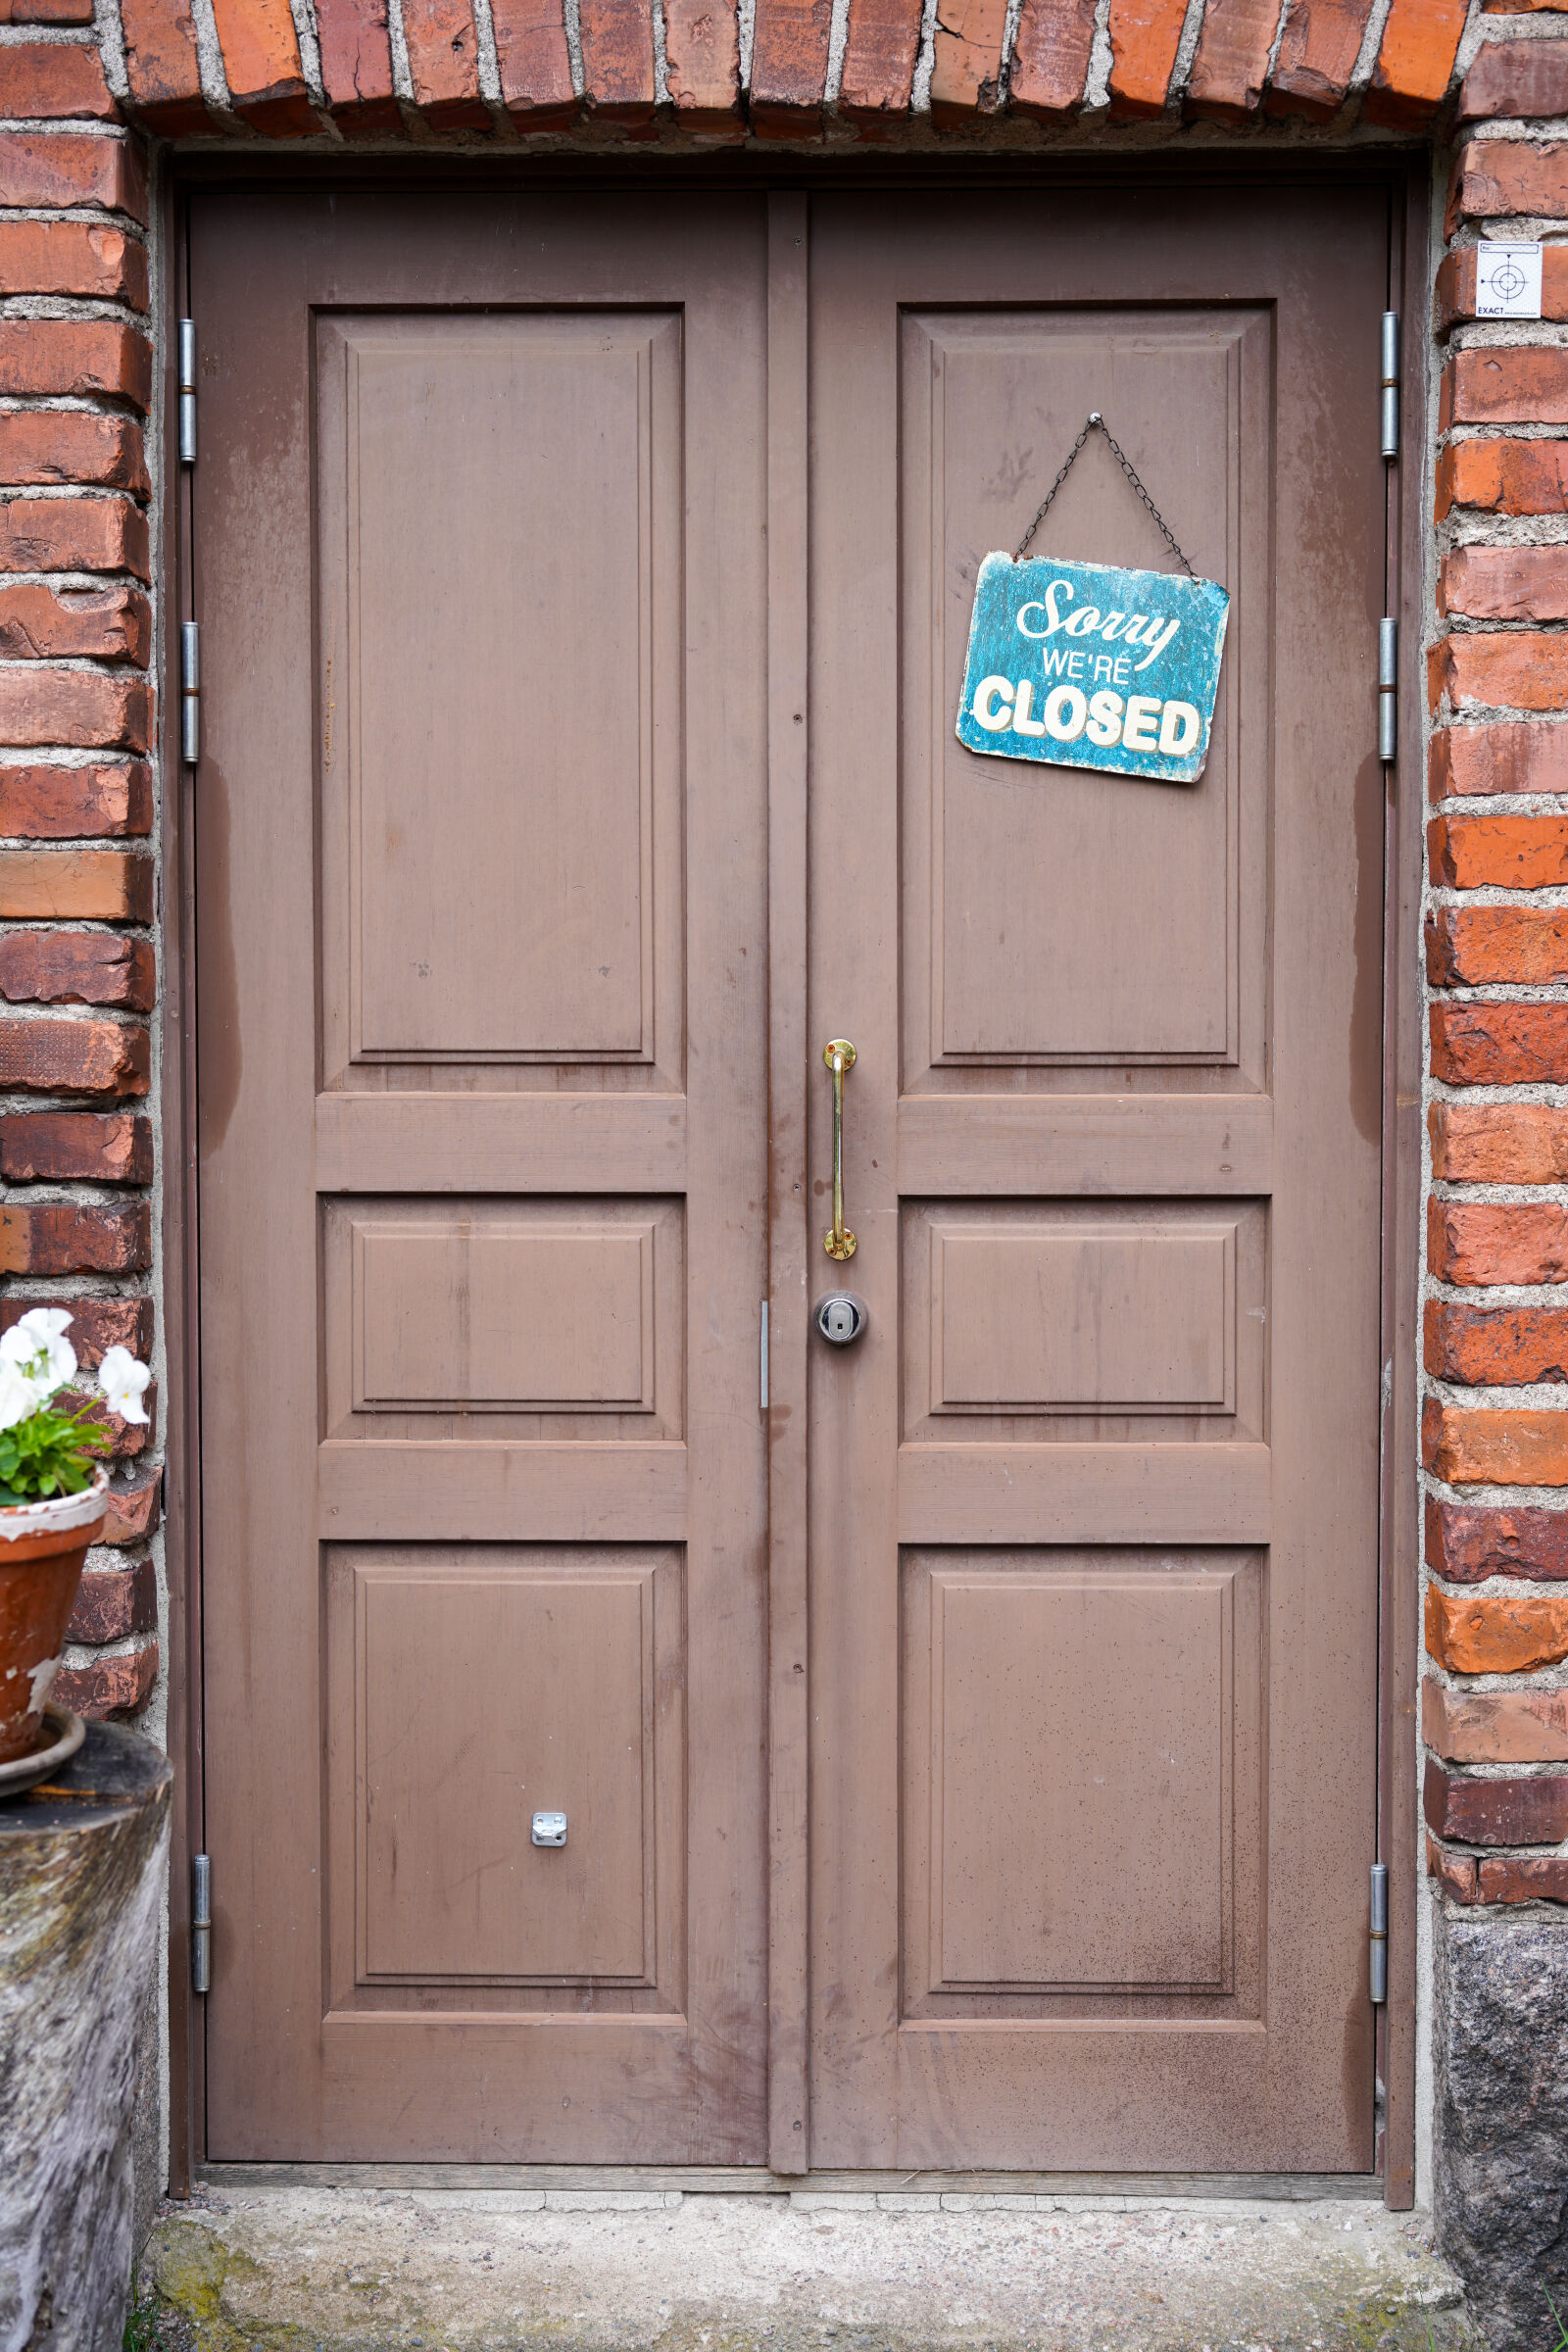 Sony a7R IV + Sigma 28-70mm F2.8 DG DN | C sample photo. Closed sign doorway photography